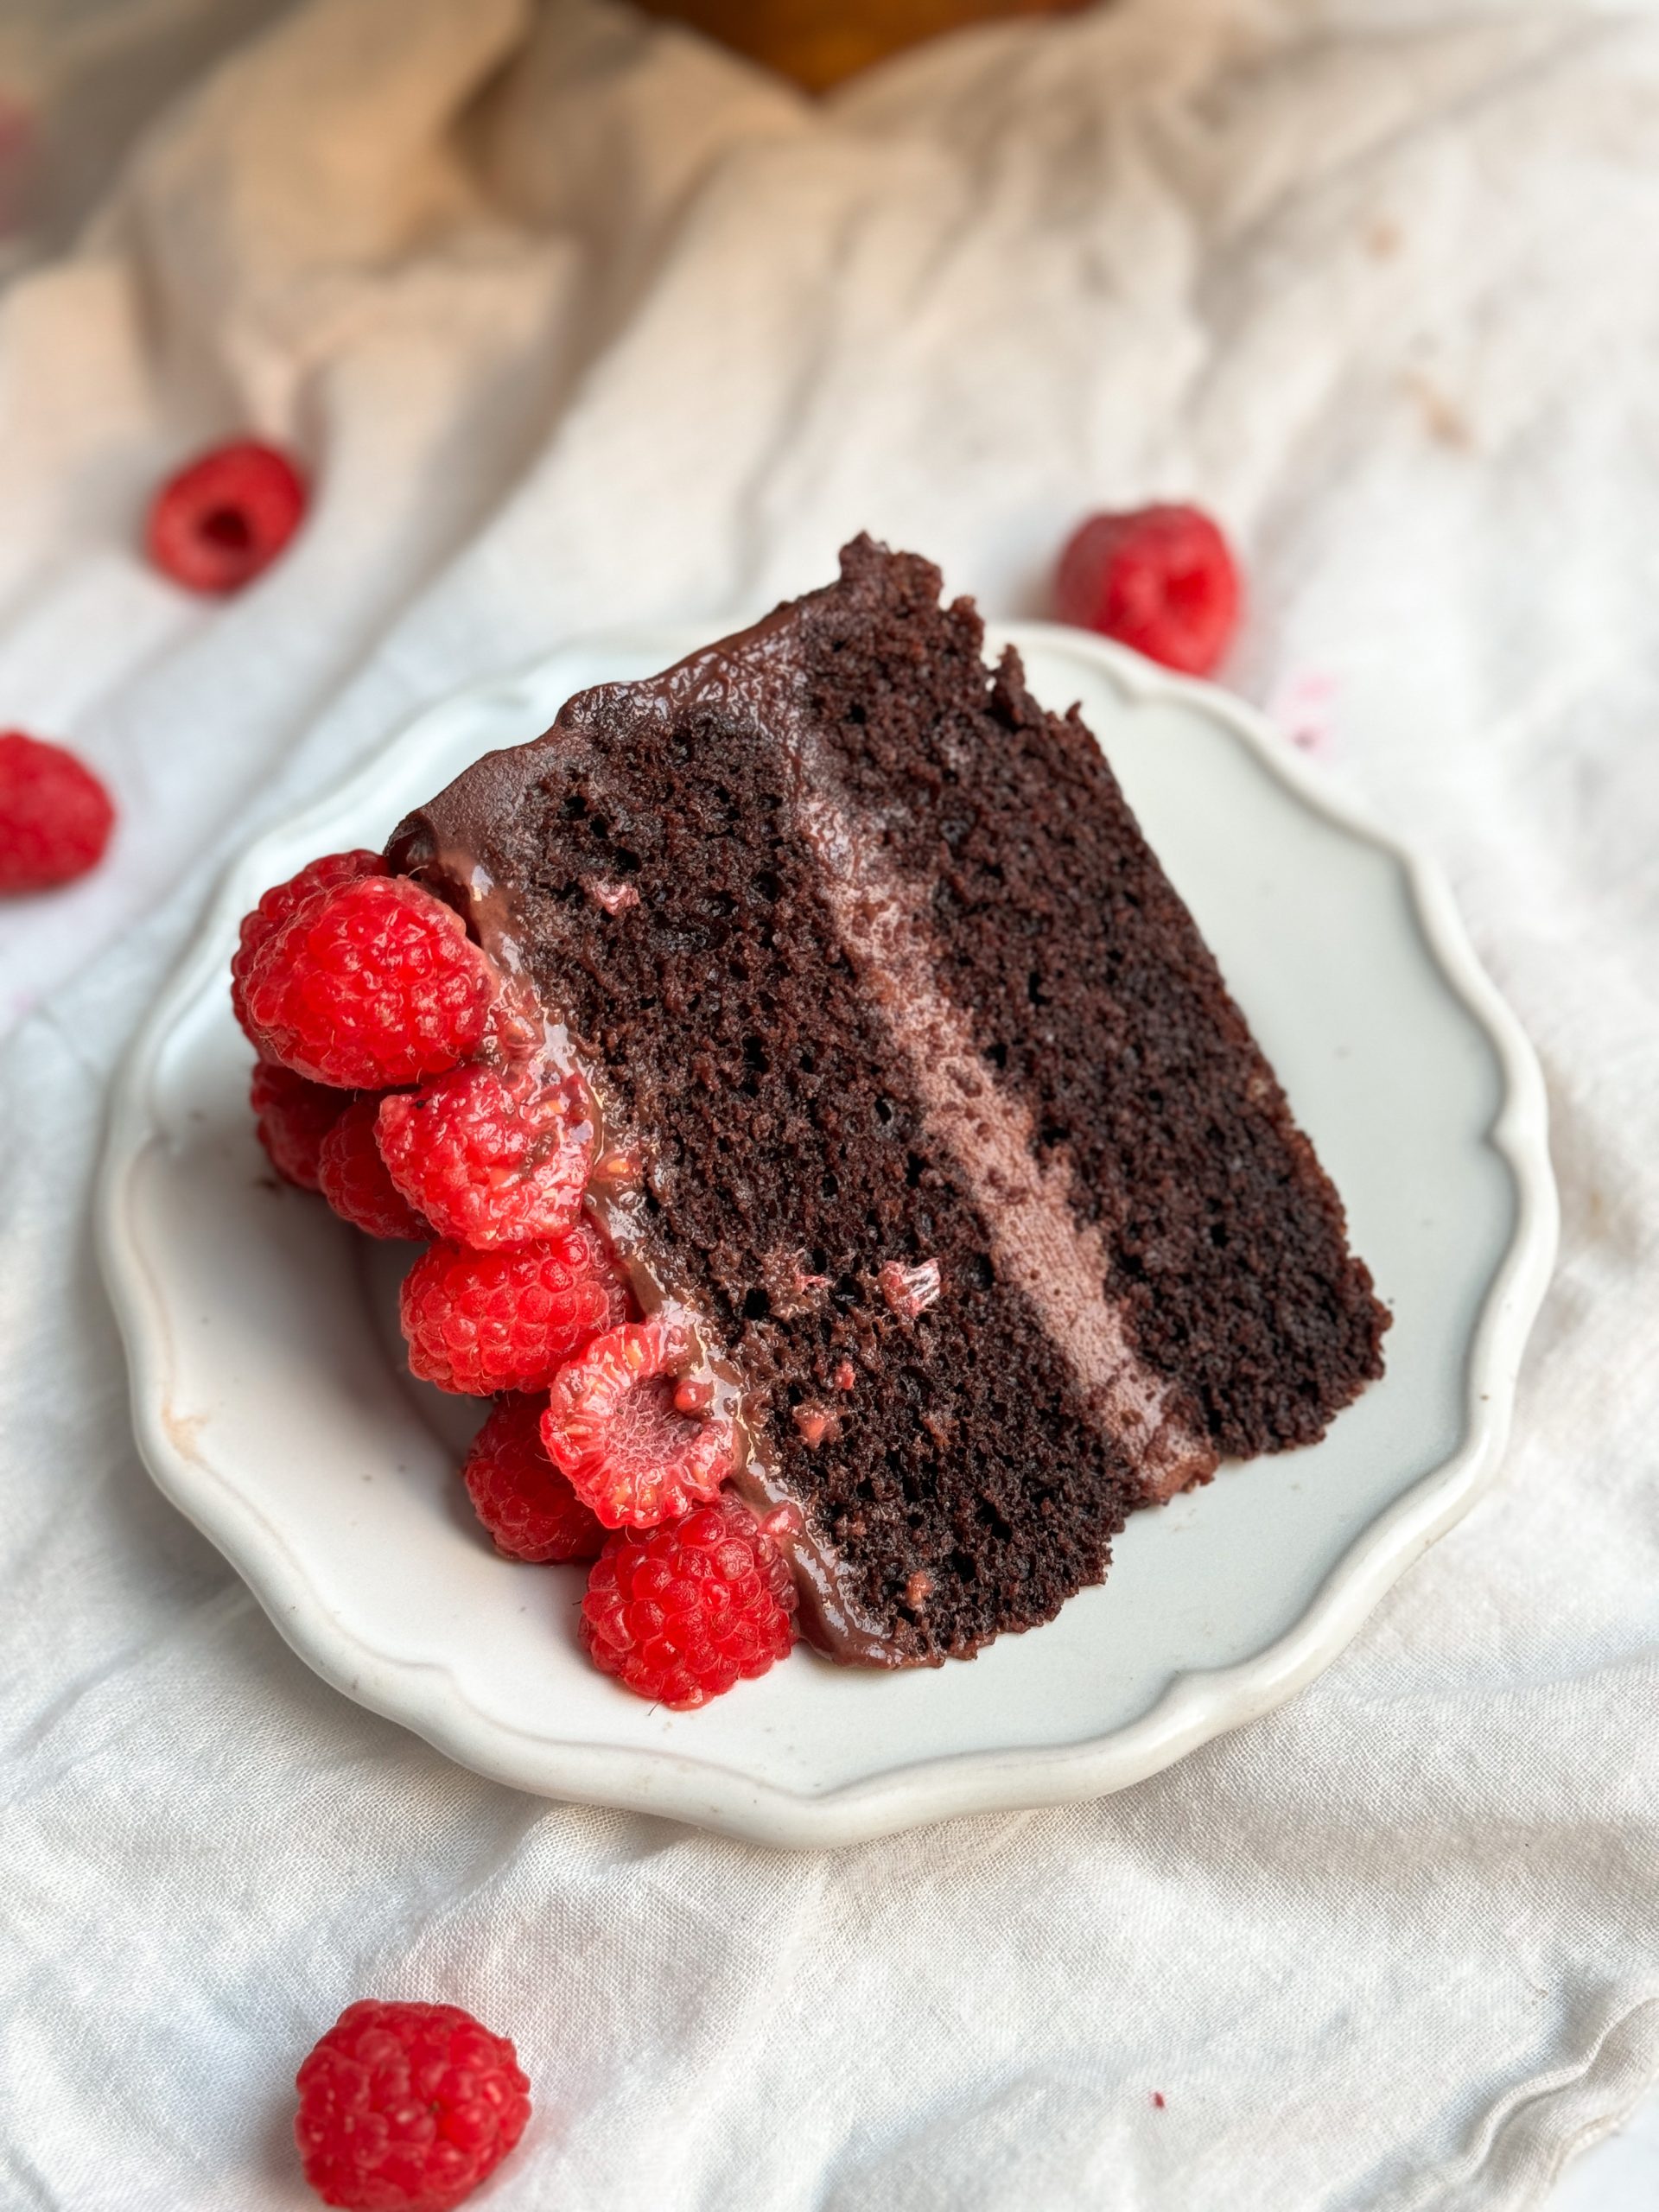 A slice of chocolate raspberry fudge cake on a small plate. cake has 2 layers of moist chocolate cake, ganache in between and on top, and is decorated with raspberries